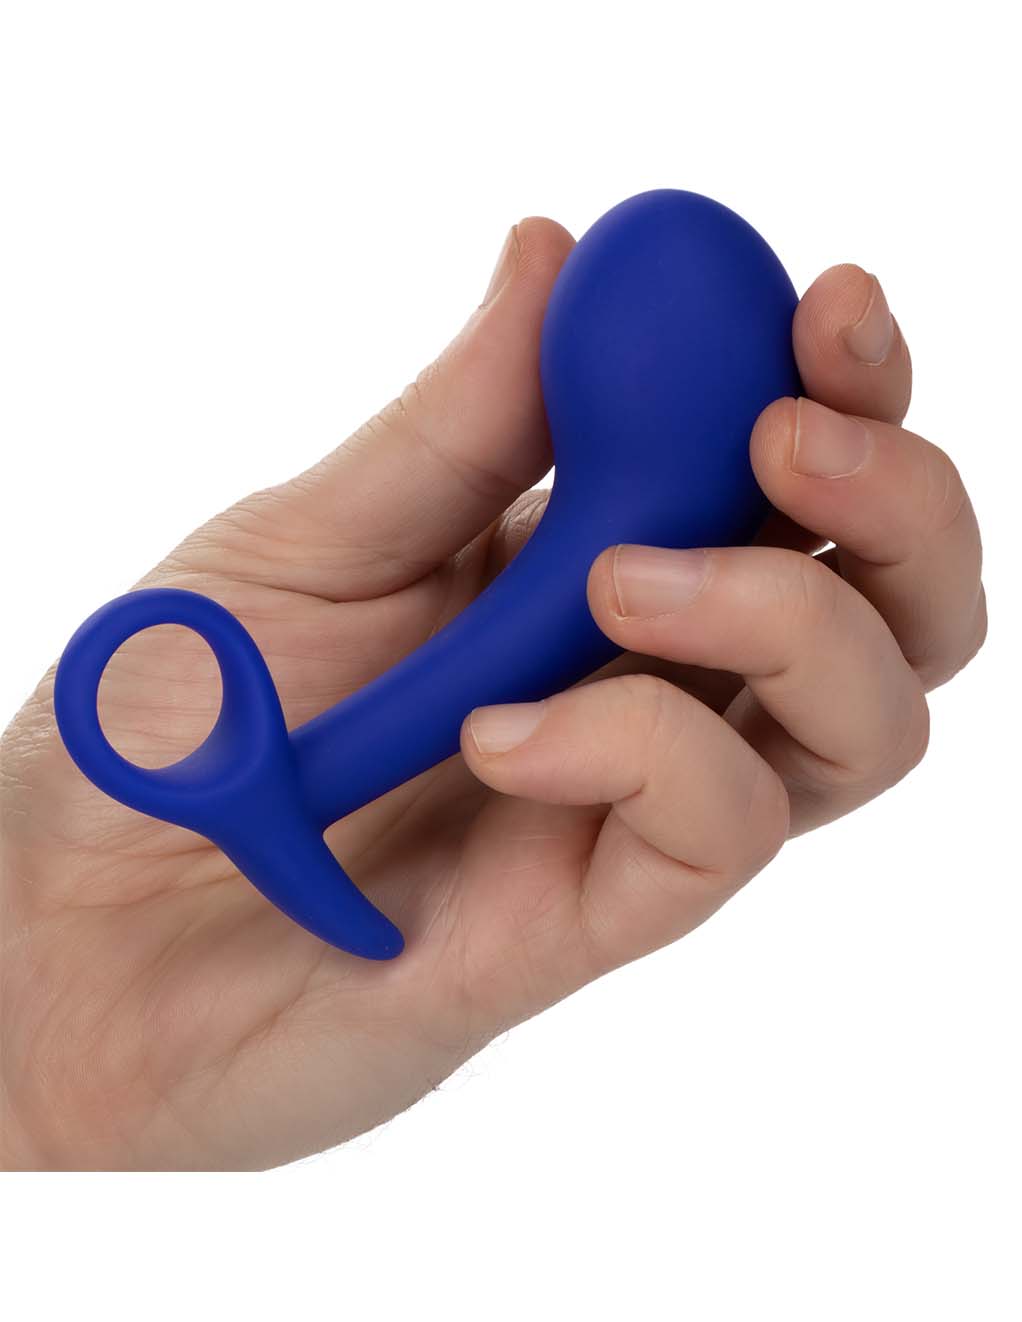 Admiral Silicone Anal Training Set- Hand